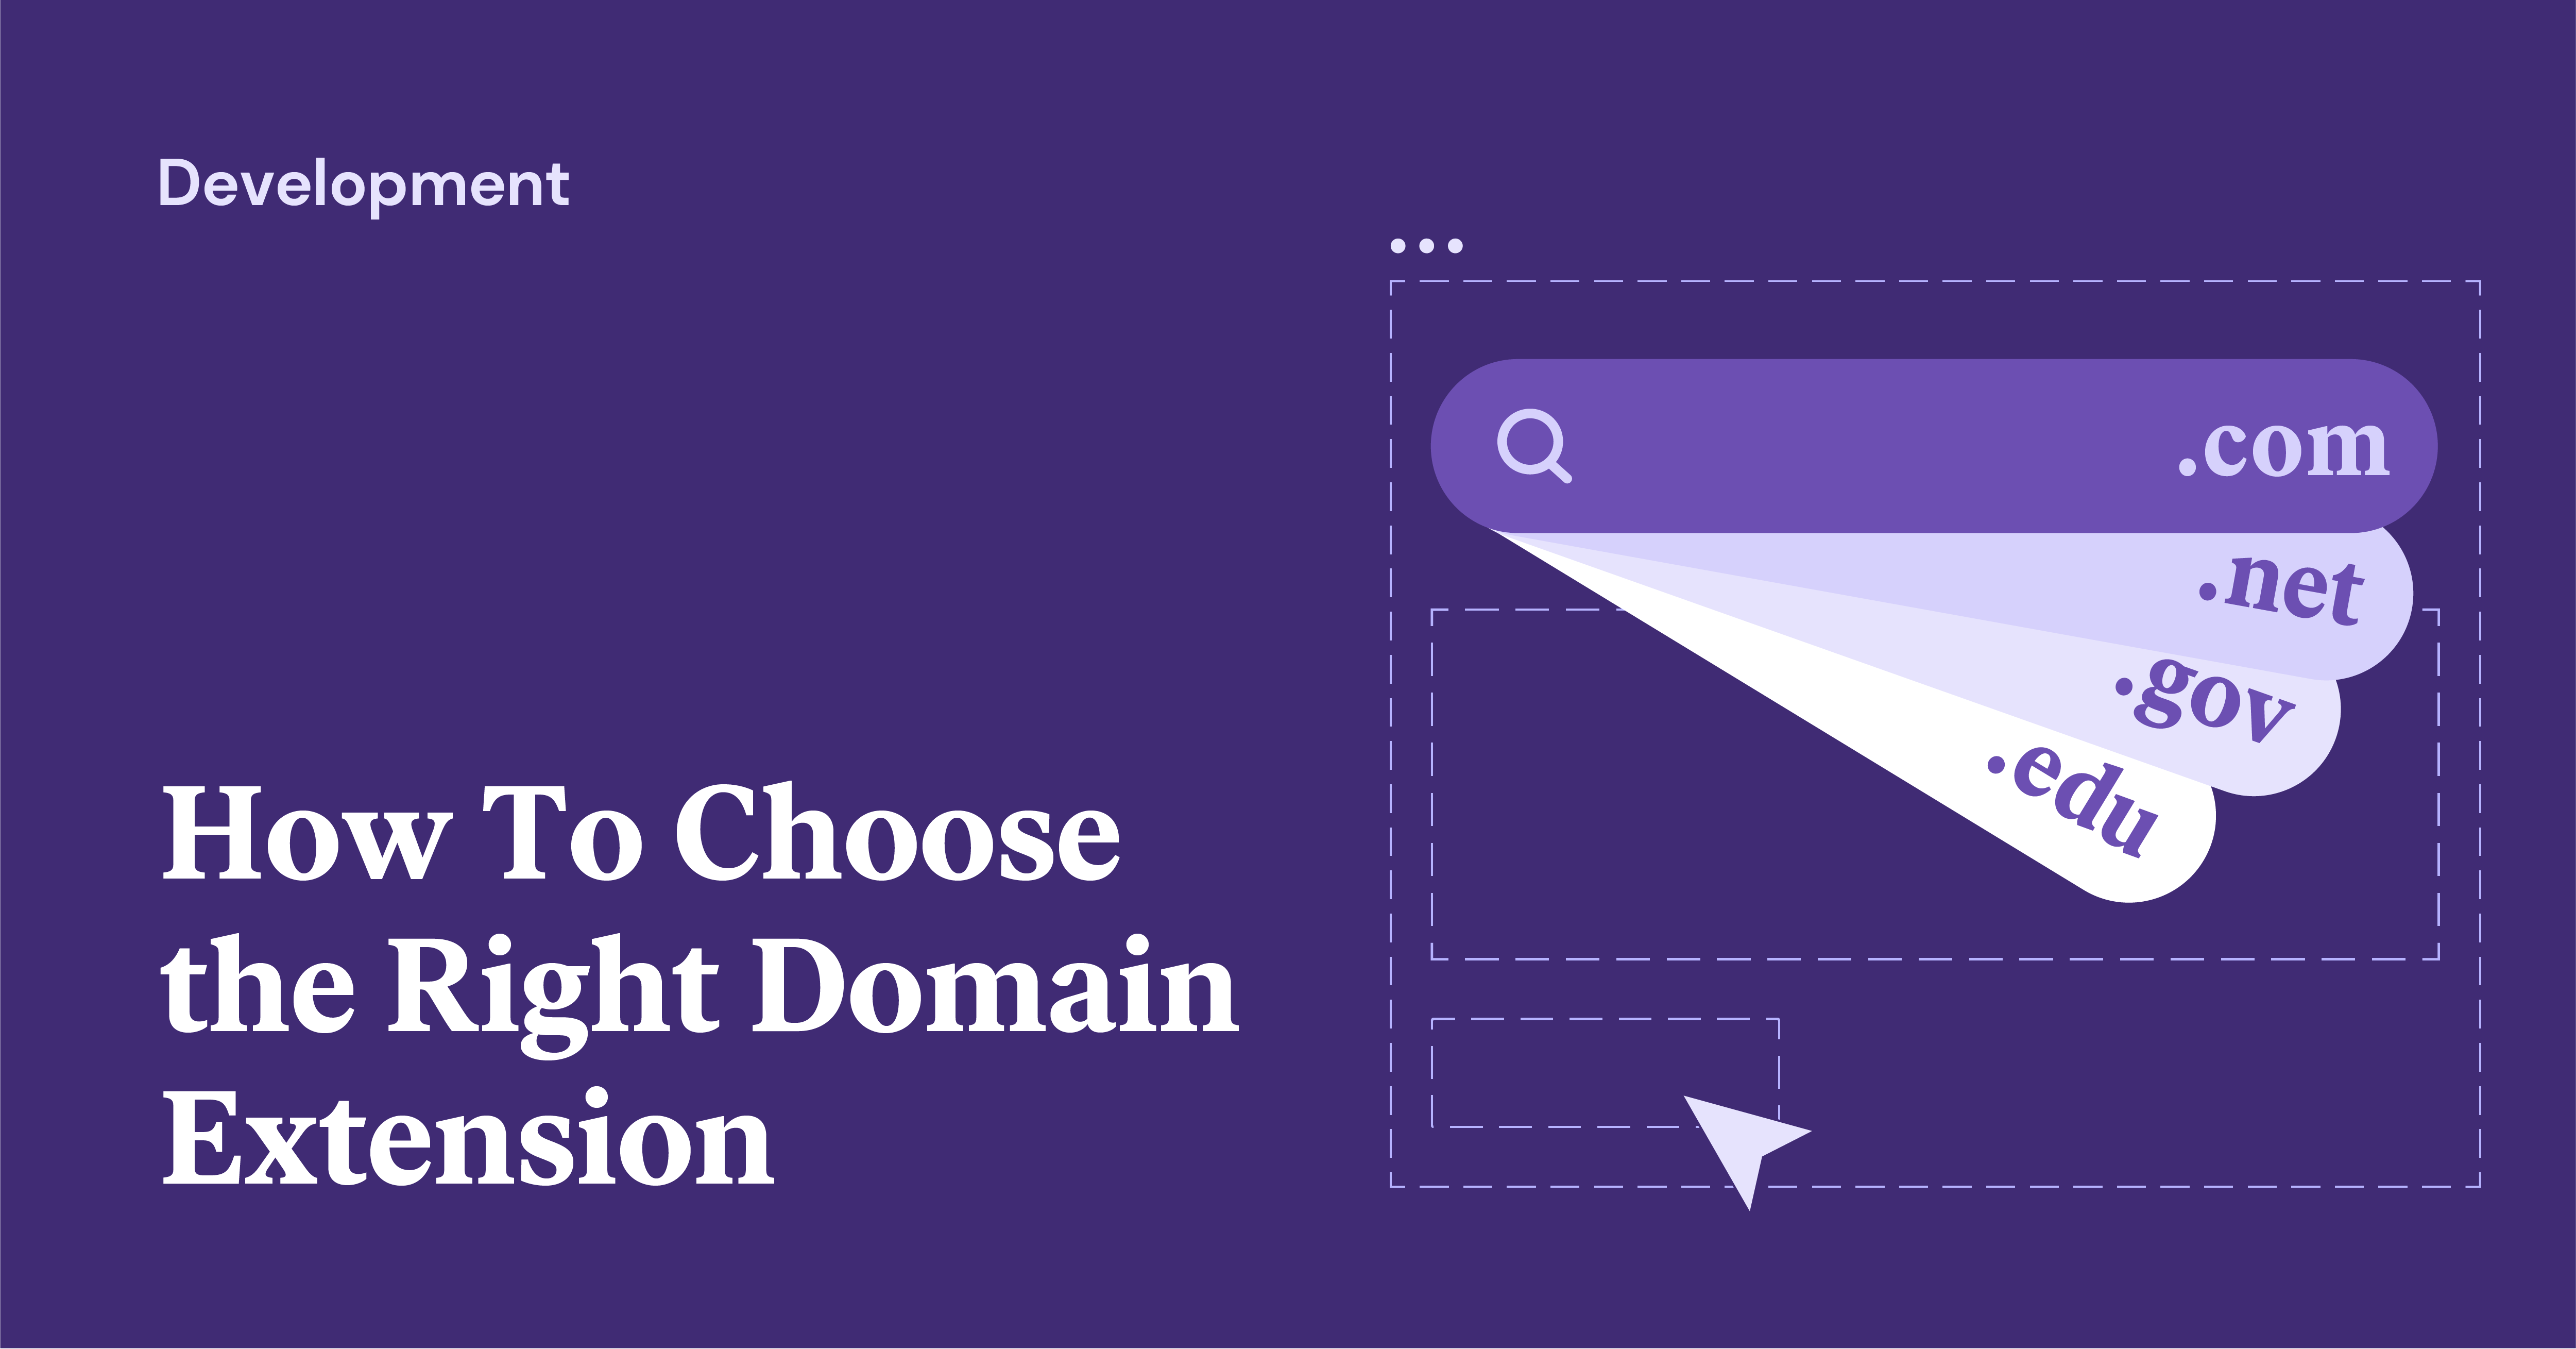 Com vs .Net: How to Choose the Right Domain Extension